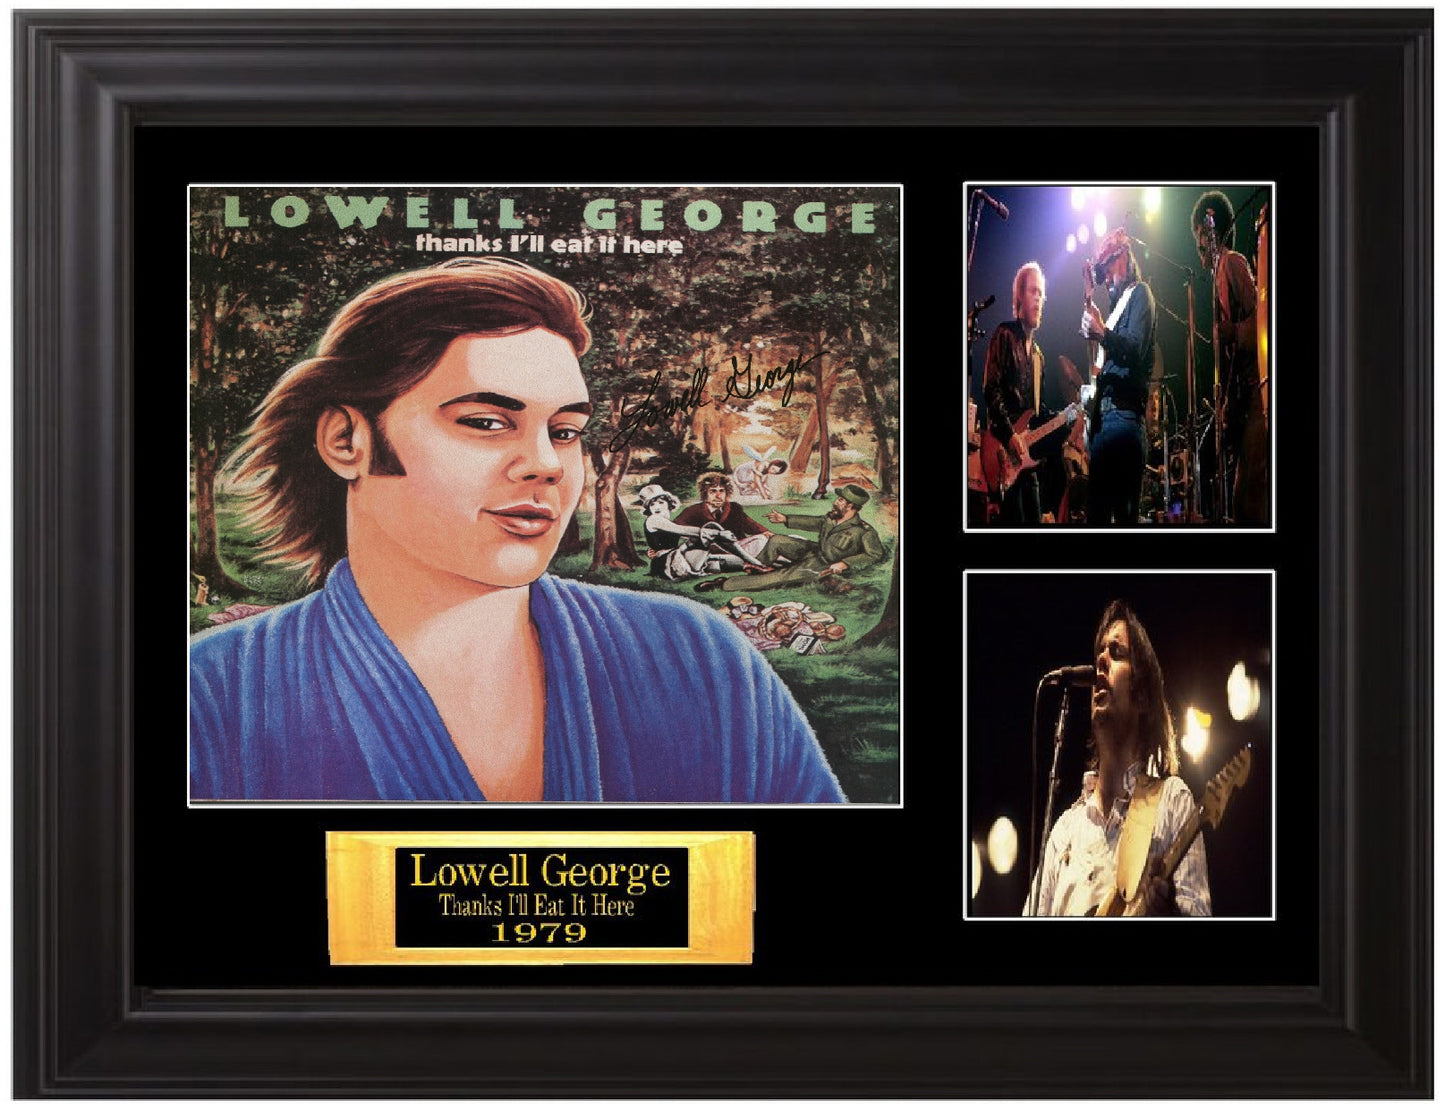 Lowell George Autographed lp - Zion Graphic Collectibles